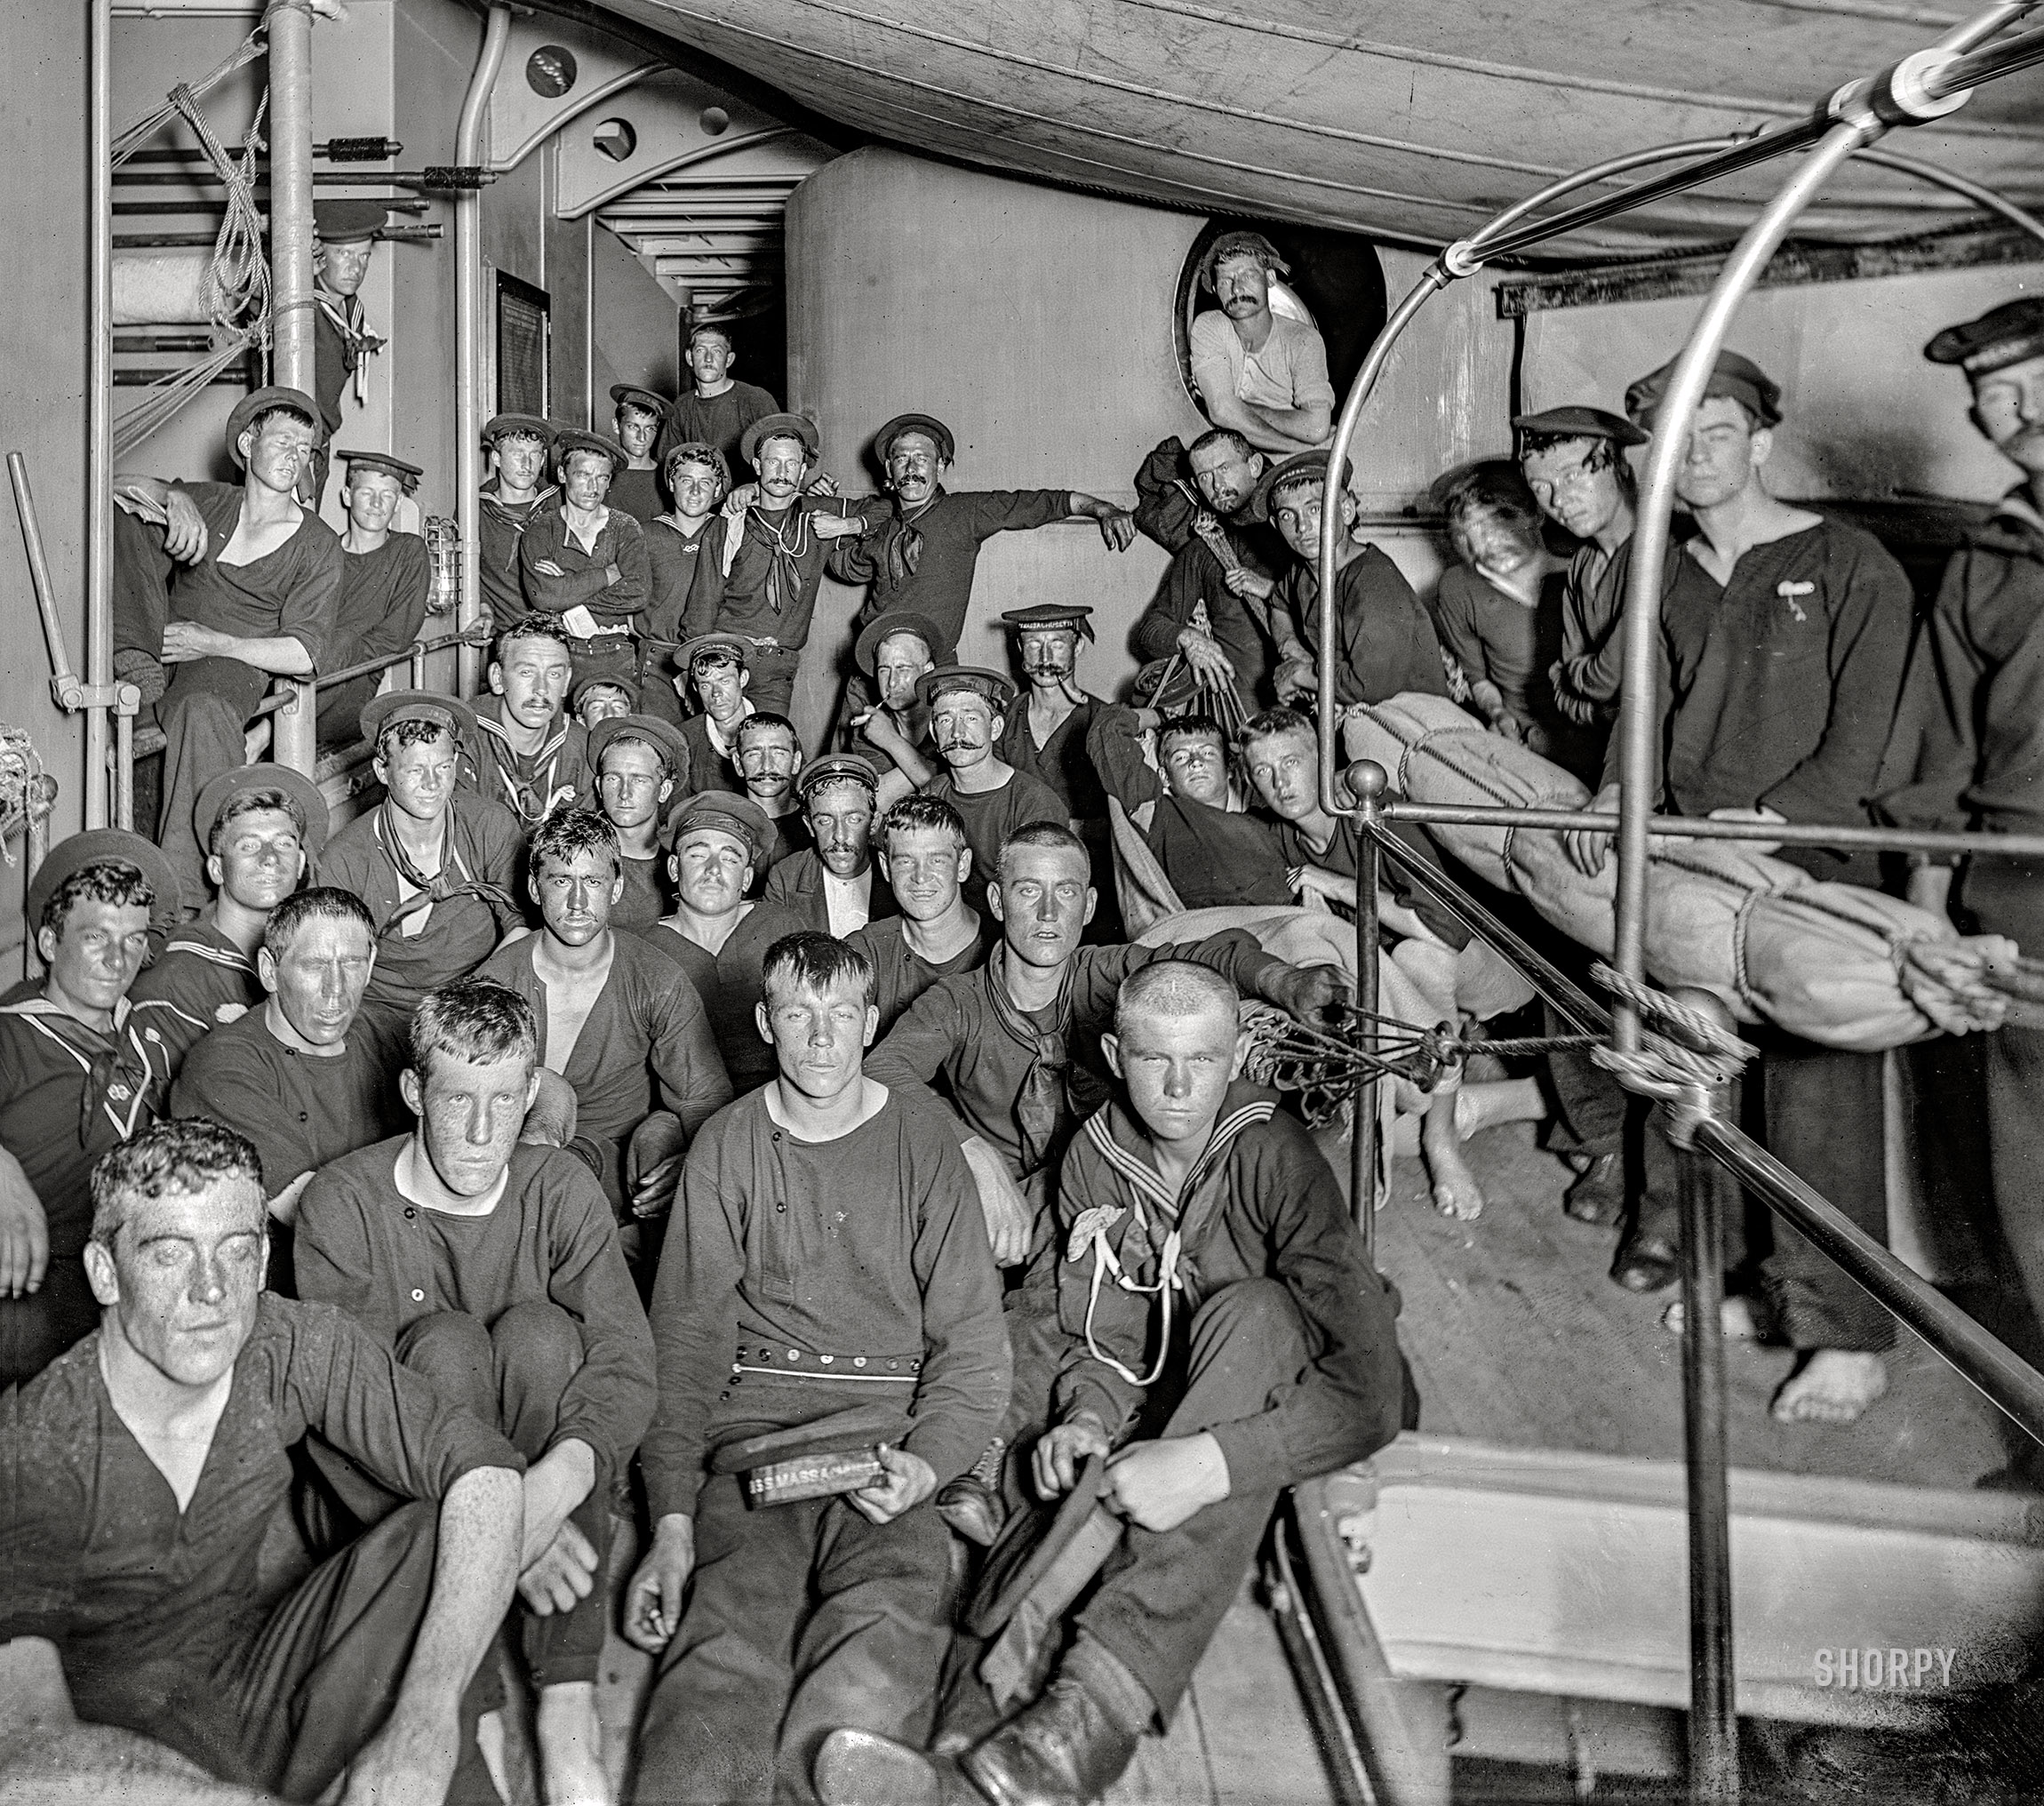 Aboard the U.S.S. Massachusetts circa 1899. "Ready to turn in." 8x10 inch dry plate glass negative by Edward H. Hart for the Detroit Photographic Company. View full size.